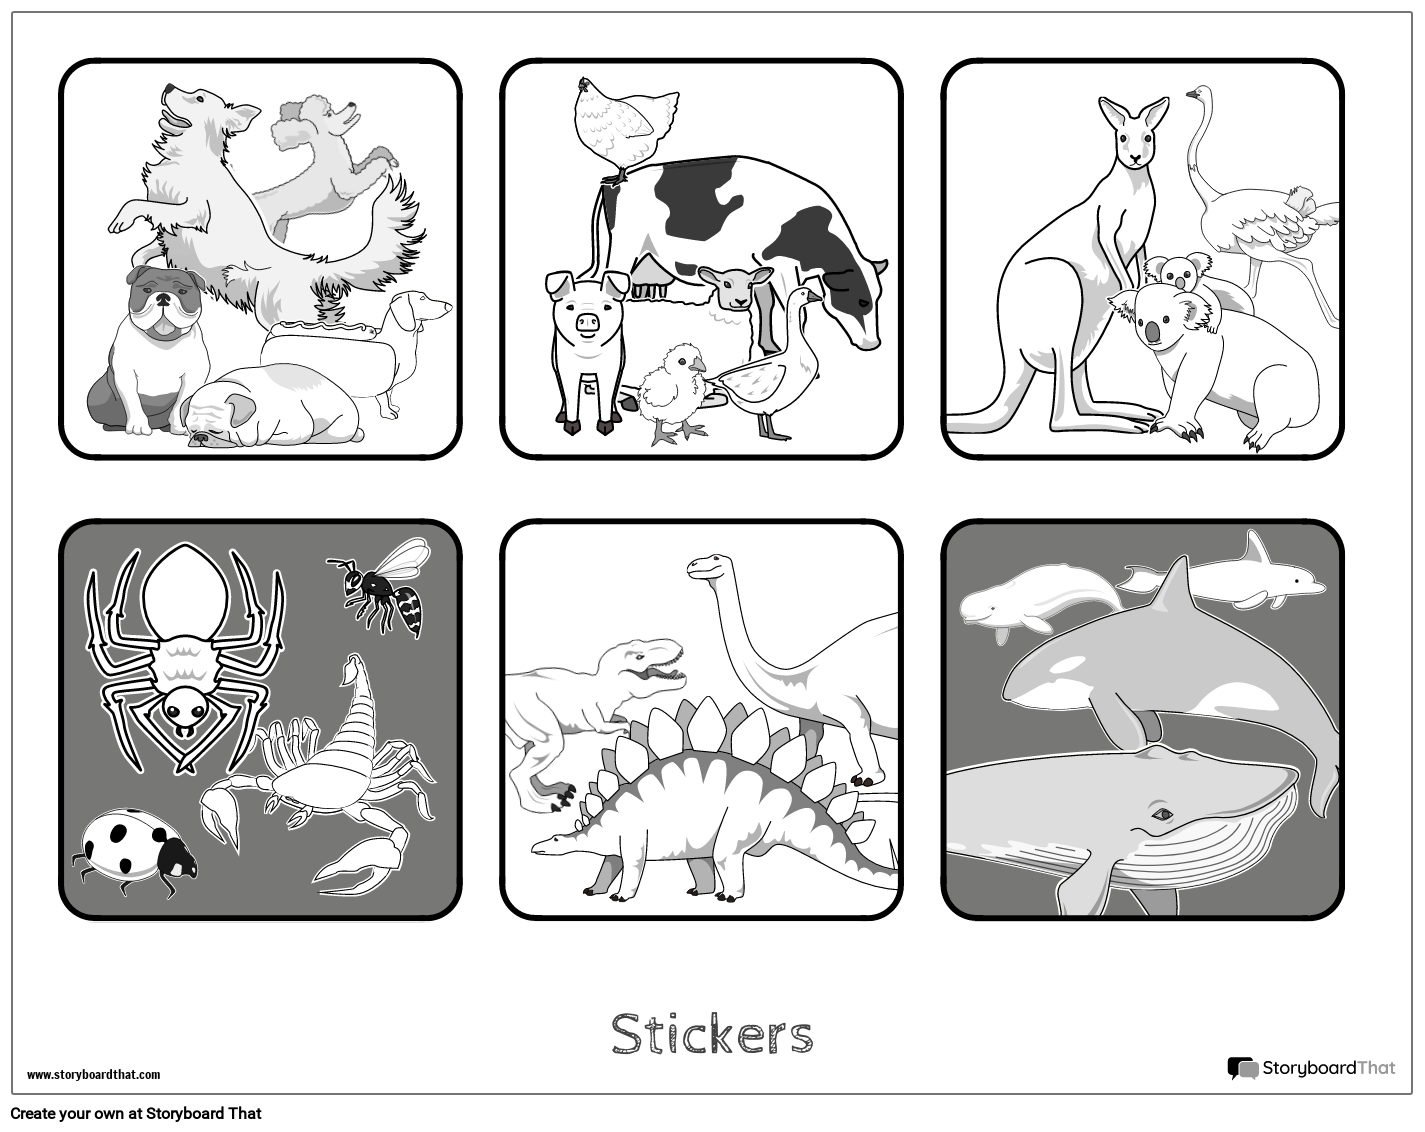 New Create Page Stickers Template 3 Black & White